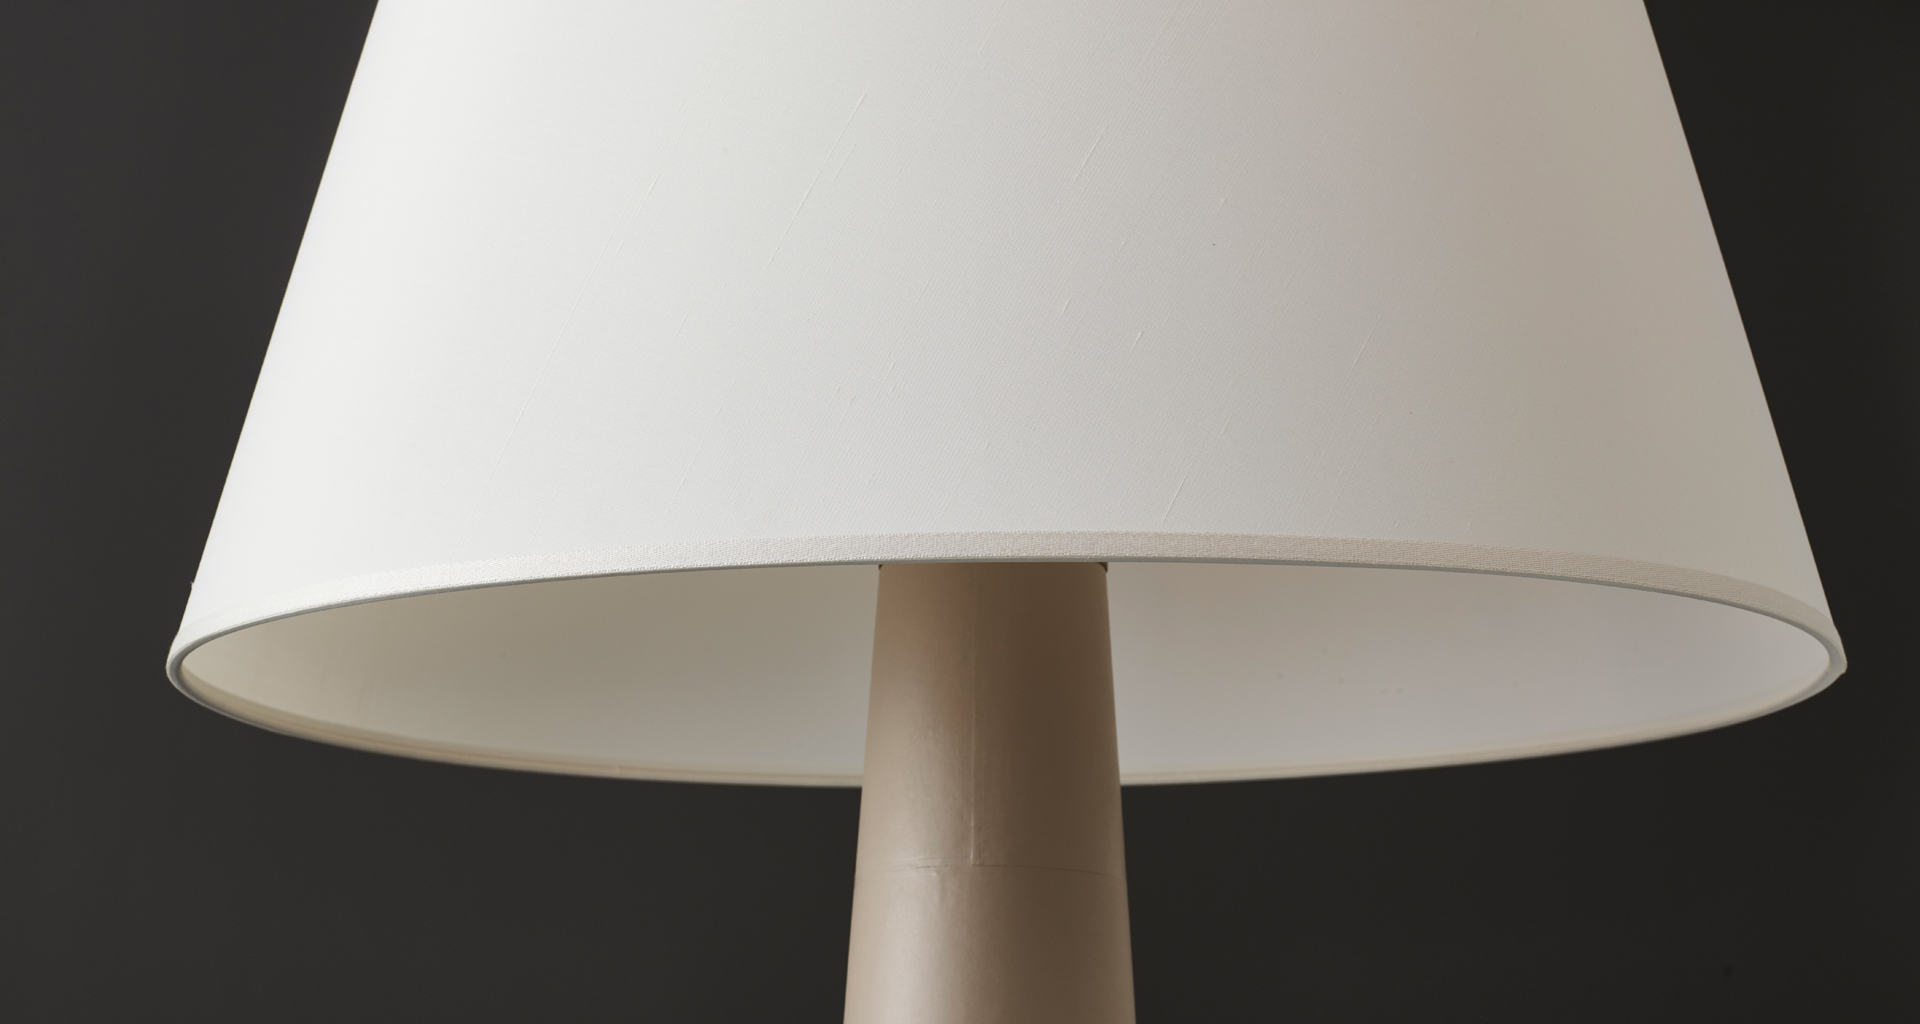 Lampshade detail of Pia, a floor LED lamp with wooden or leather structure, base n bronze or covered in leather and a hand-embroidered lampshade, from Promemoria's catalogue | Promemoria